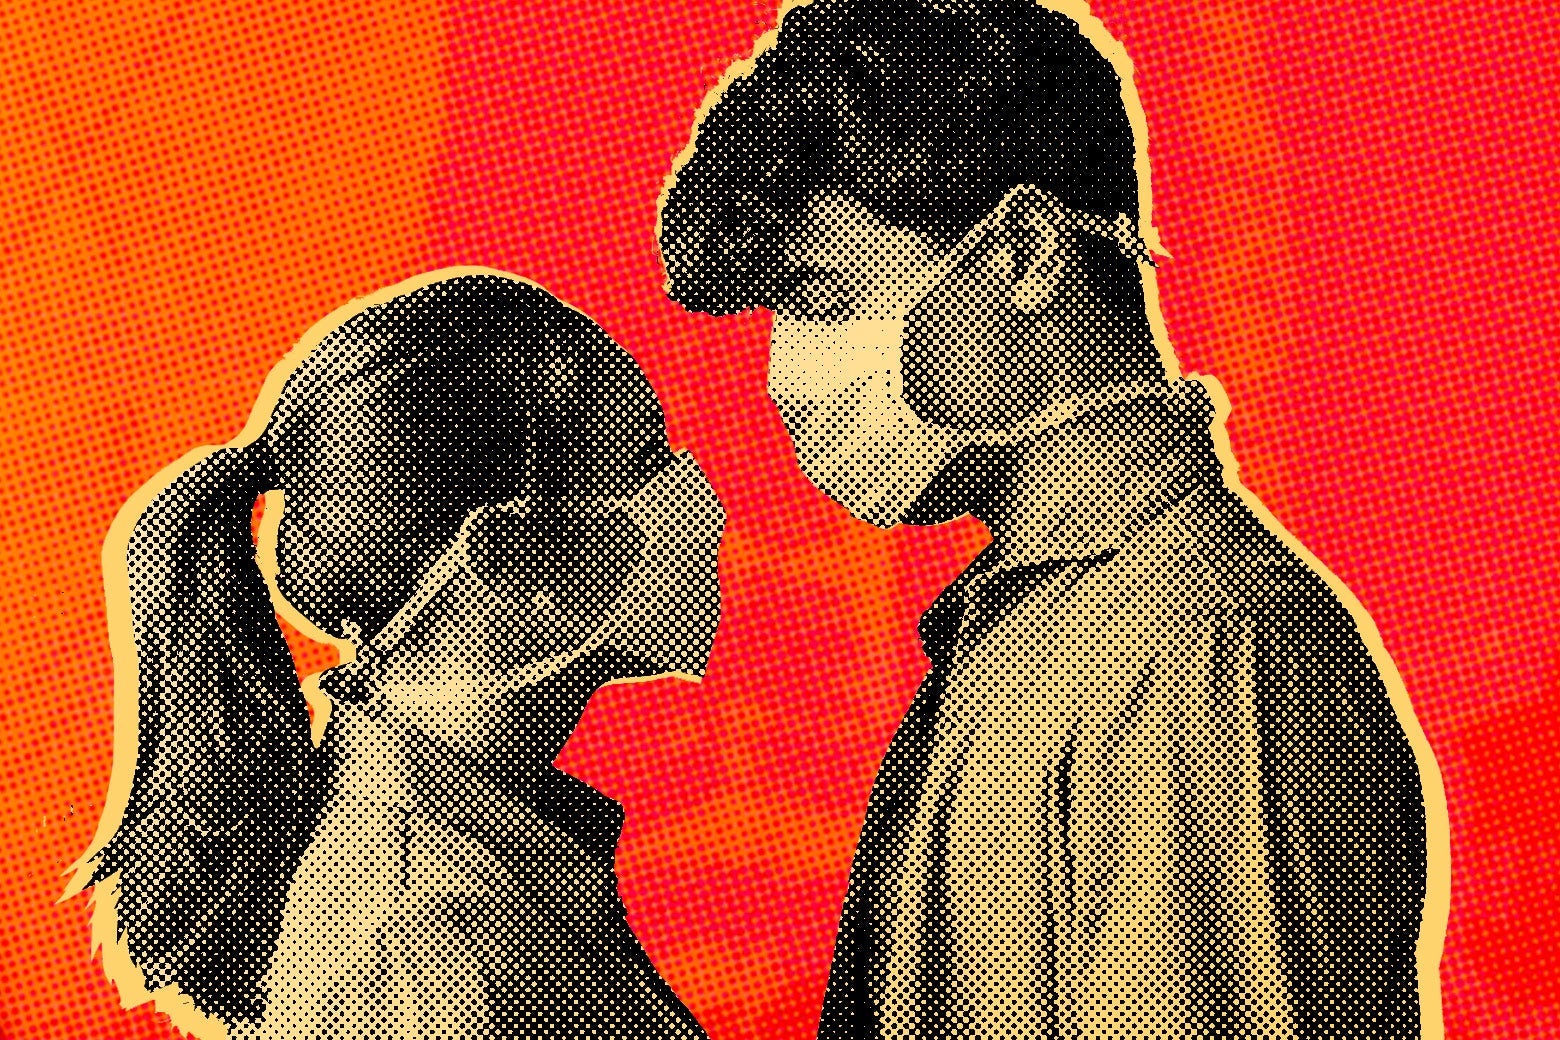 Man and woman, both wearing surgical masks, face each other